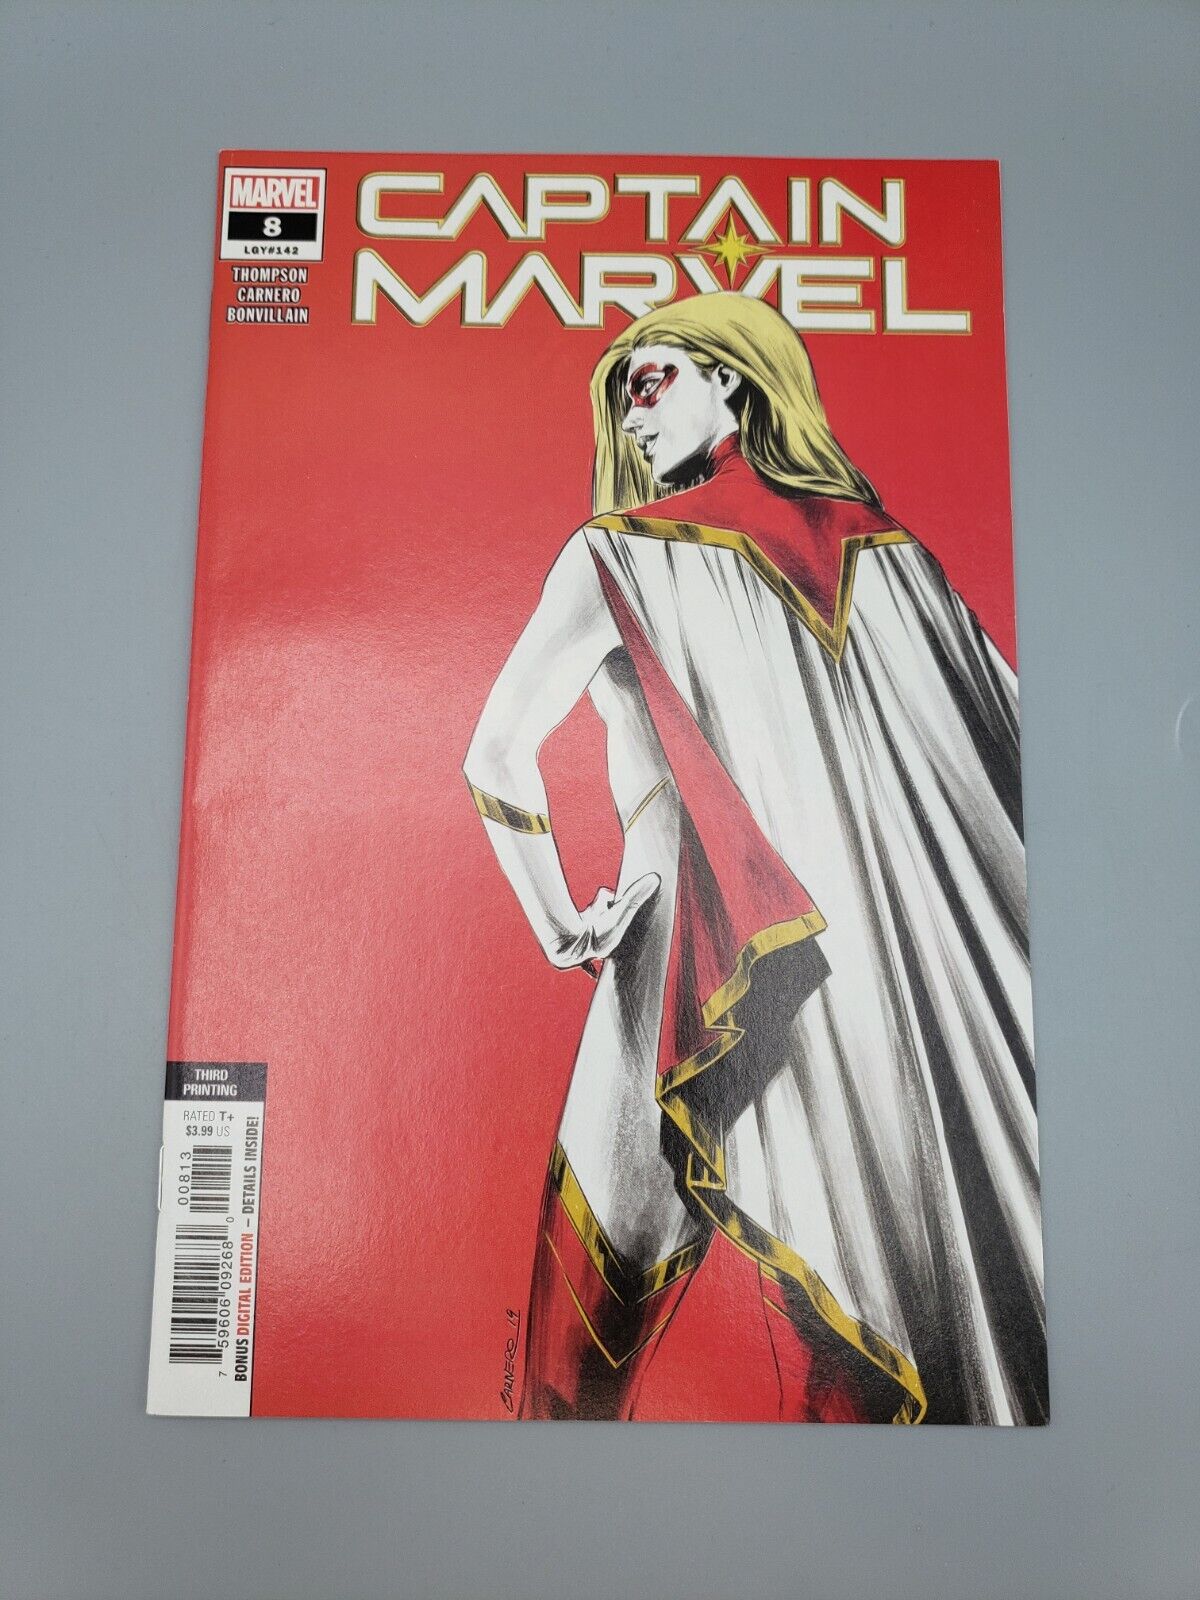 Captain Marvel Volume 10 #8 Falling Star Part 1 By Kelly Thompson Comic Book